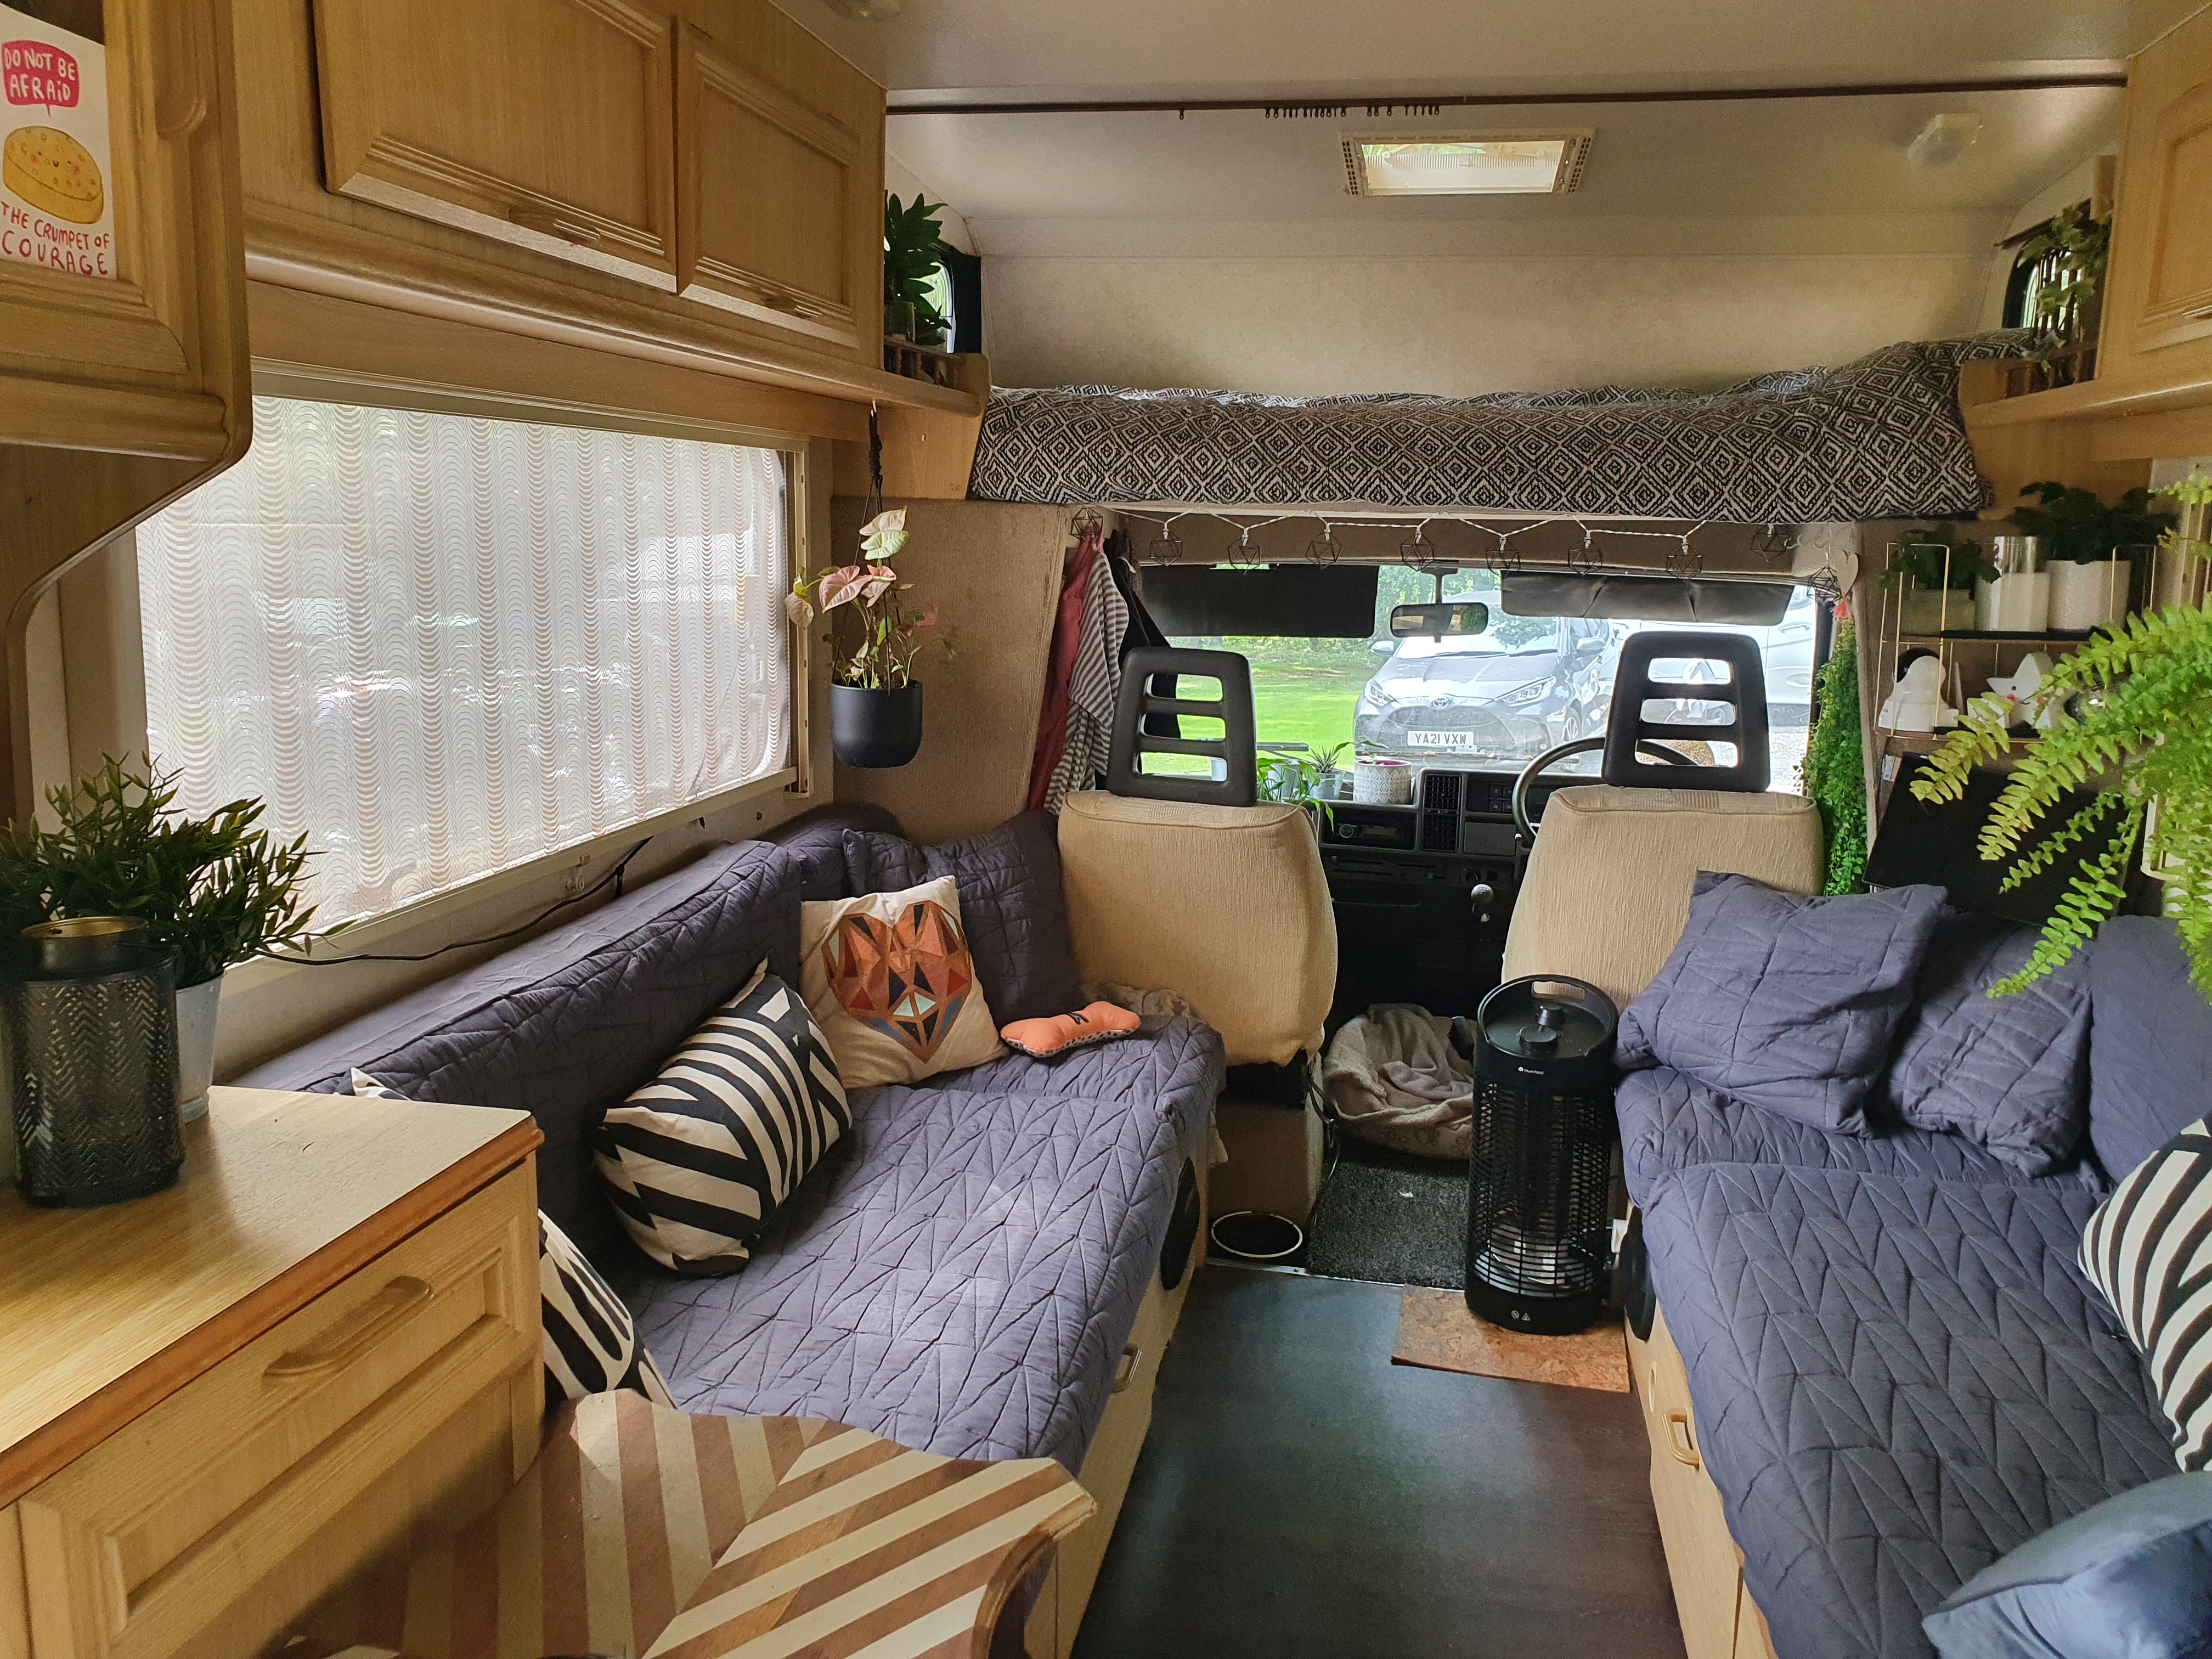 Designer Nicky Cash's motorhome, which she moved into in 2021